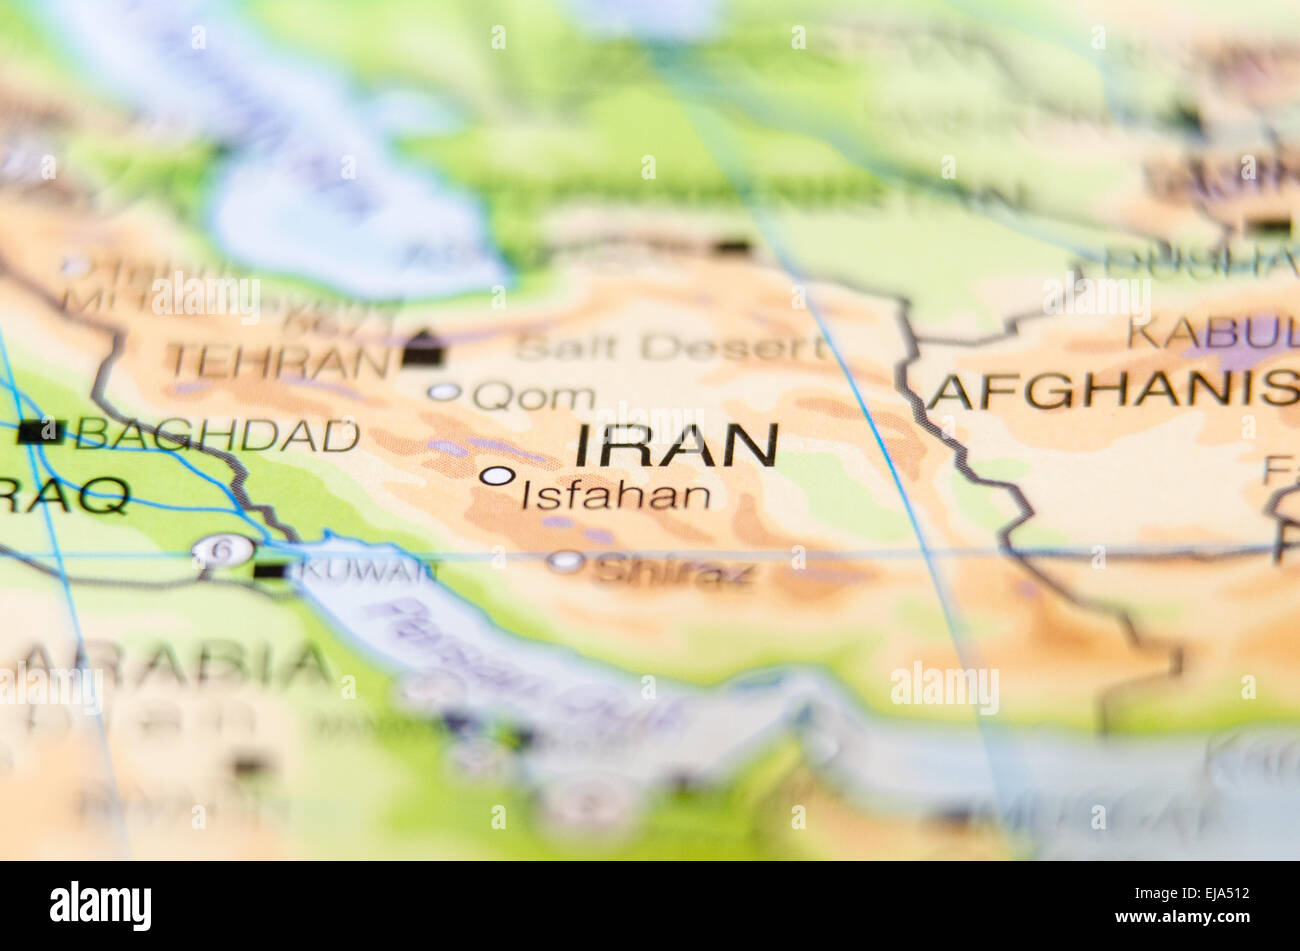 iran country on map Stock Photo